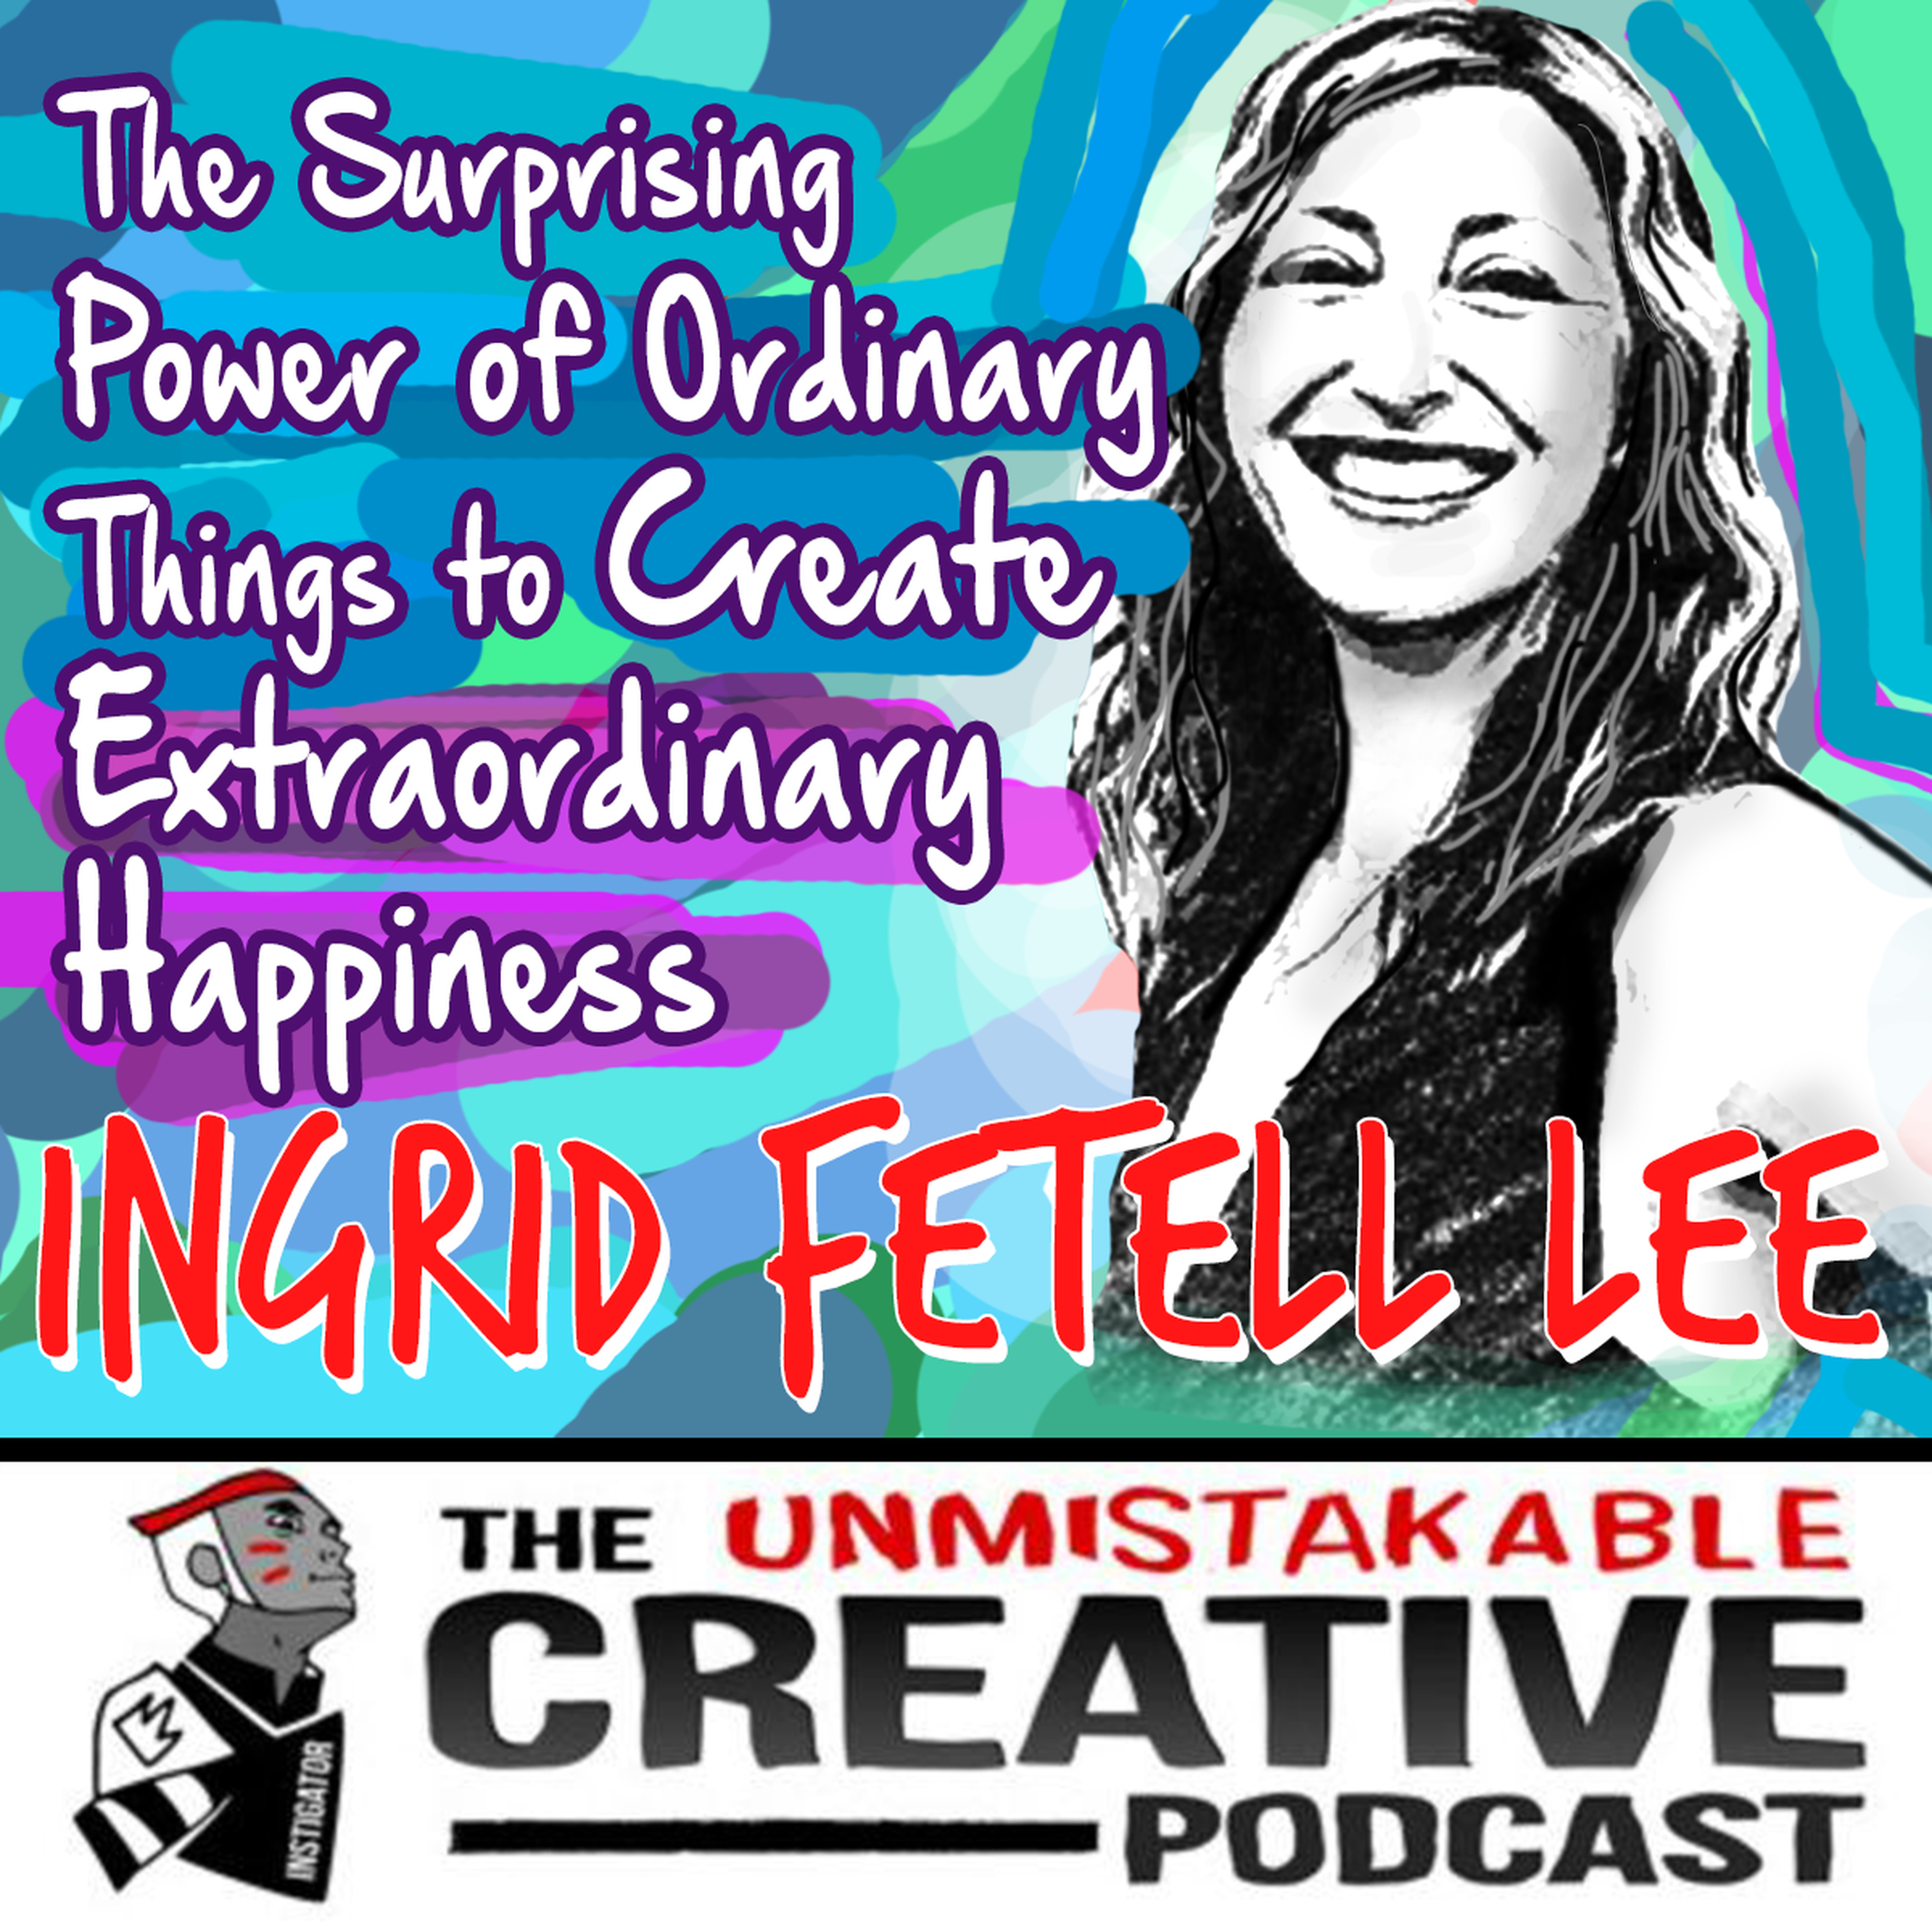 The Surprising Power of Ordinary Things to Create Extraordinary Happiness with Ingrid Fetell Lee